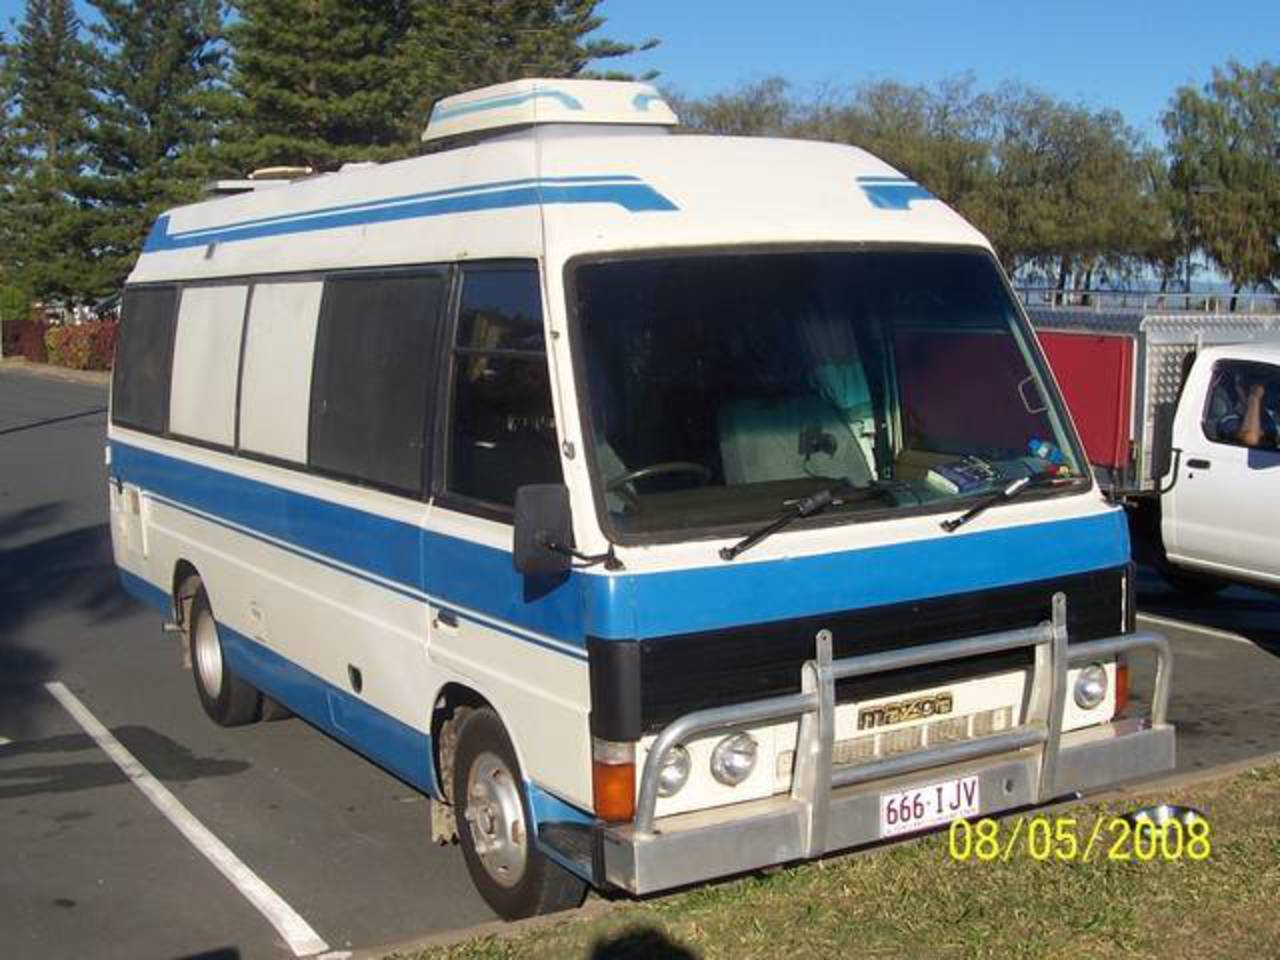 MAZDA T3500 SELF SUFFICIENT MOTOR HOME FOR SALE from Cairns Queensland